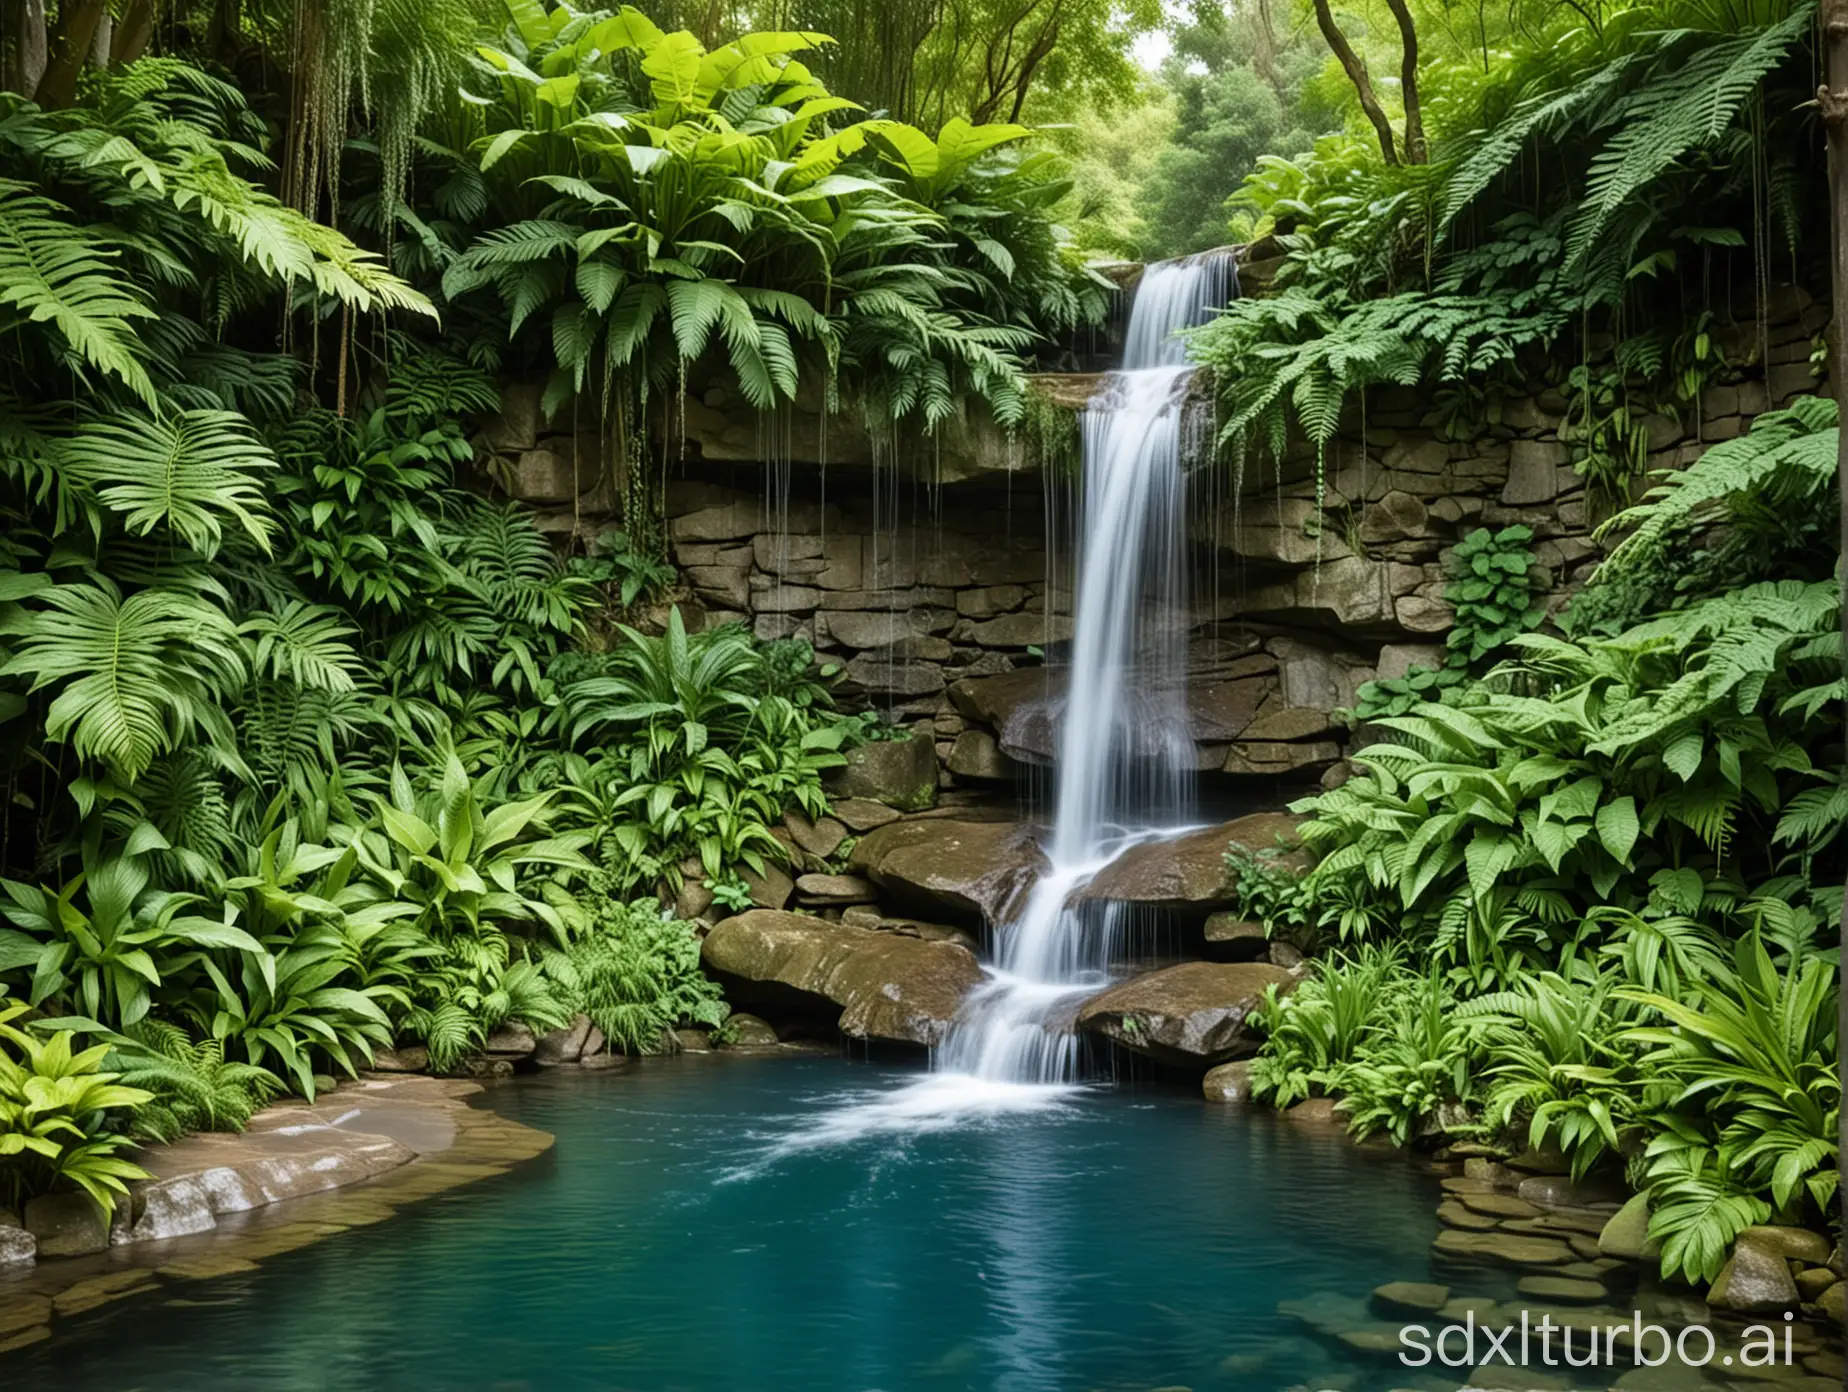 Cascading waterfall plunging into a crystal-clear pool surrounded by lush, verdant foliage.